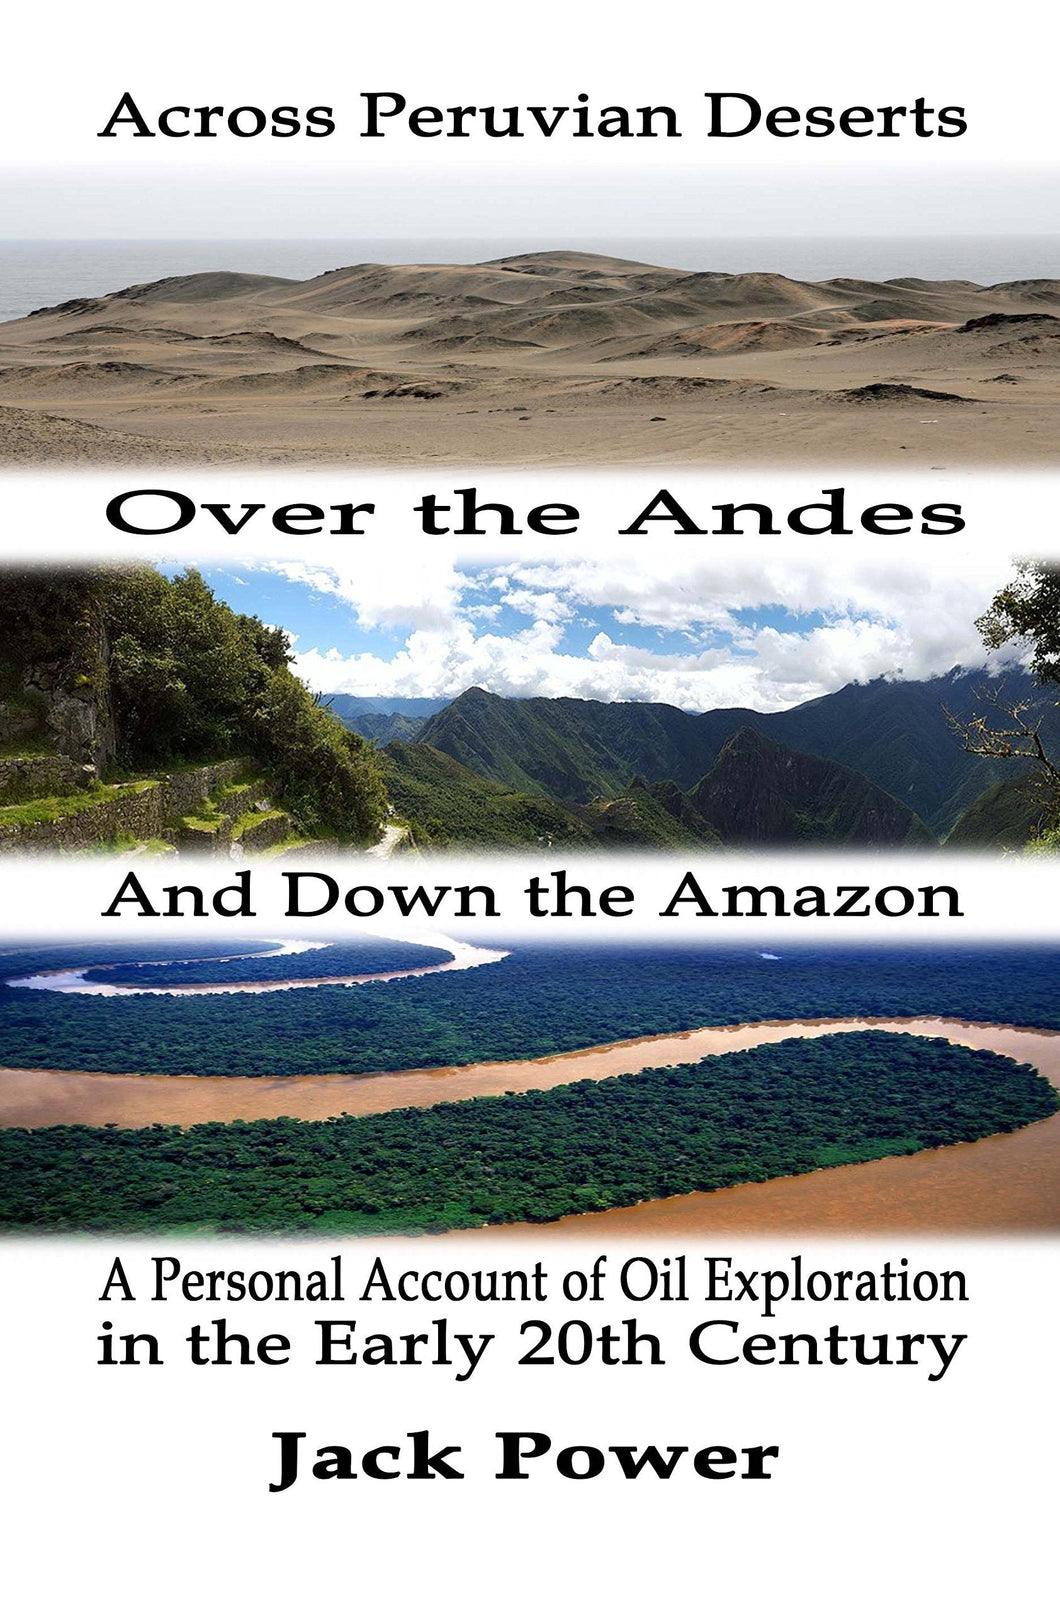 Across the Peruvian Deserts, Over the Andes, and Down the Amazon: A Personal Account of Oil Exploration in the Early 20th Century - Starry Night Publishing